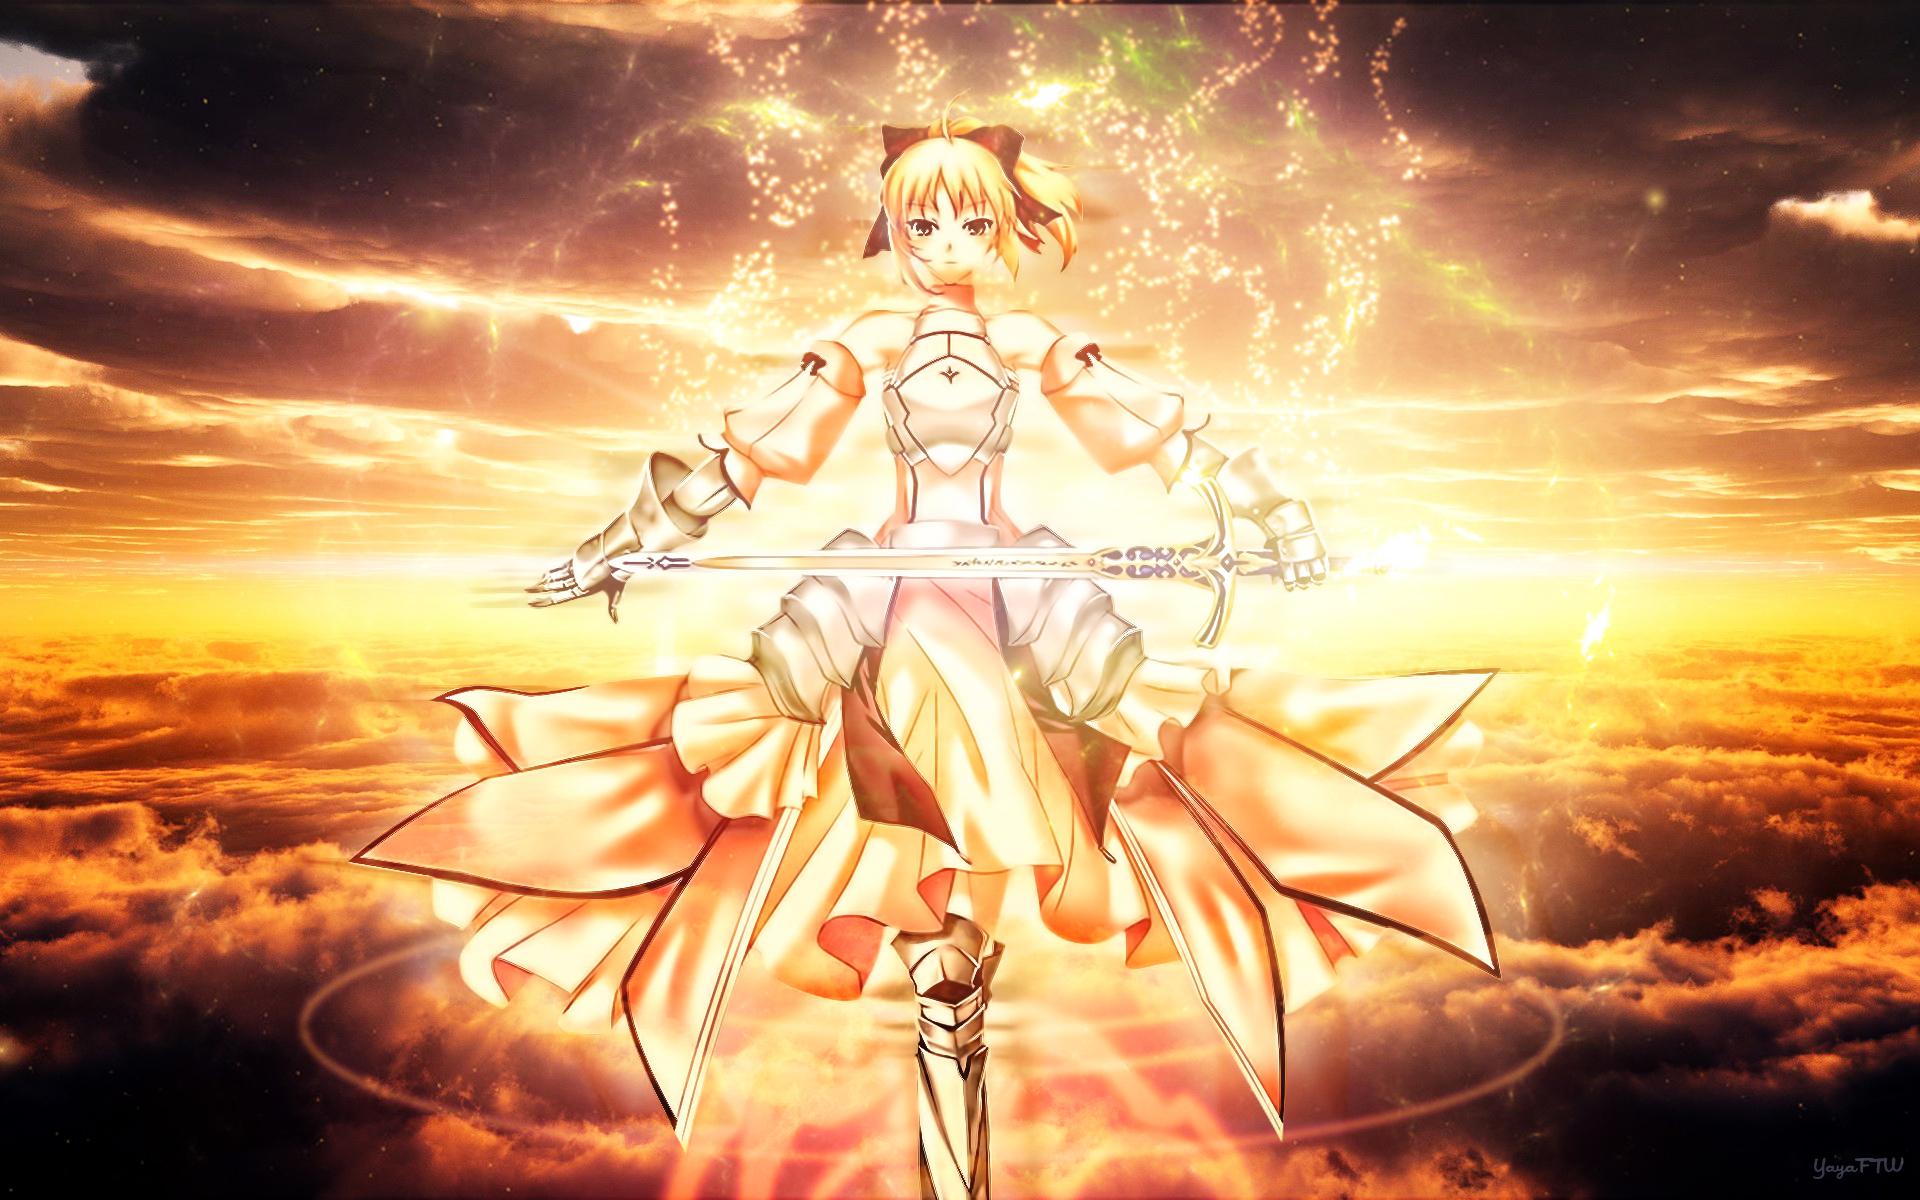 Saber Lily High Quality And Resolution Wallpaper On